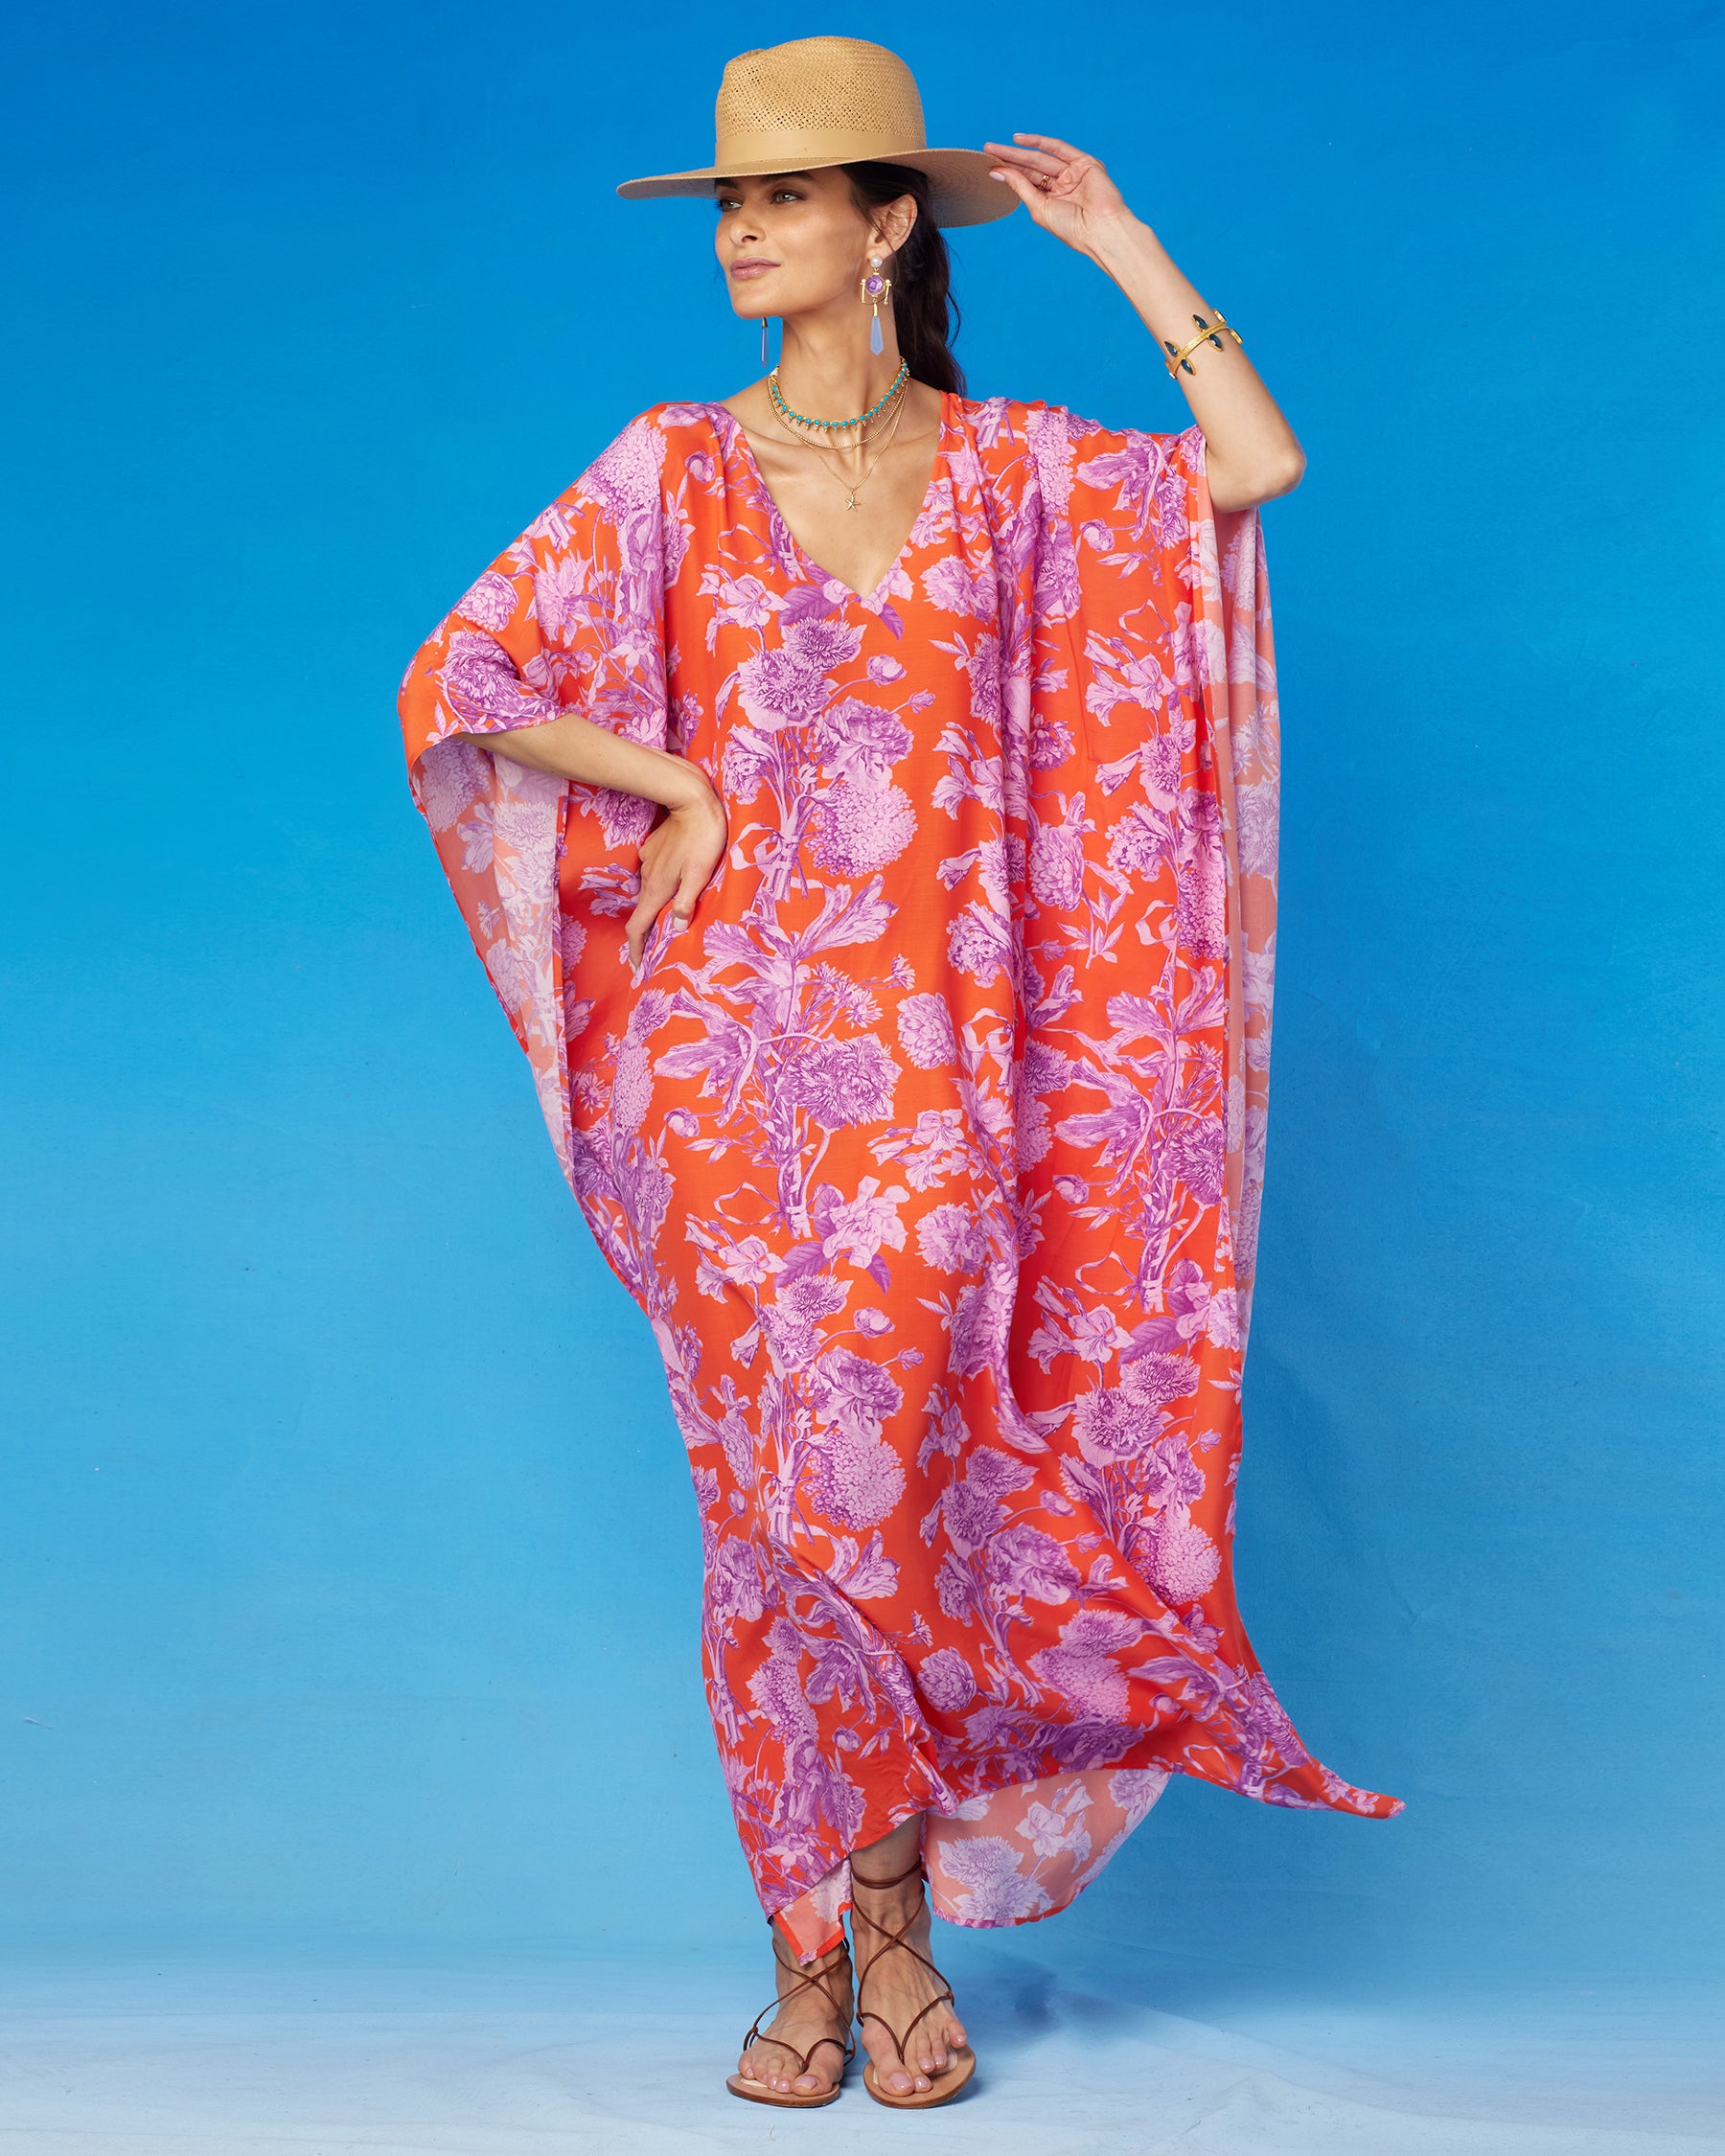 Camille Kaftan in Orange and Purple Floral Toile